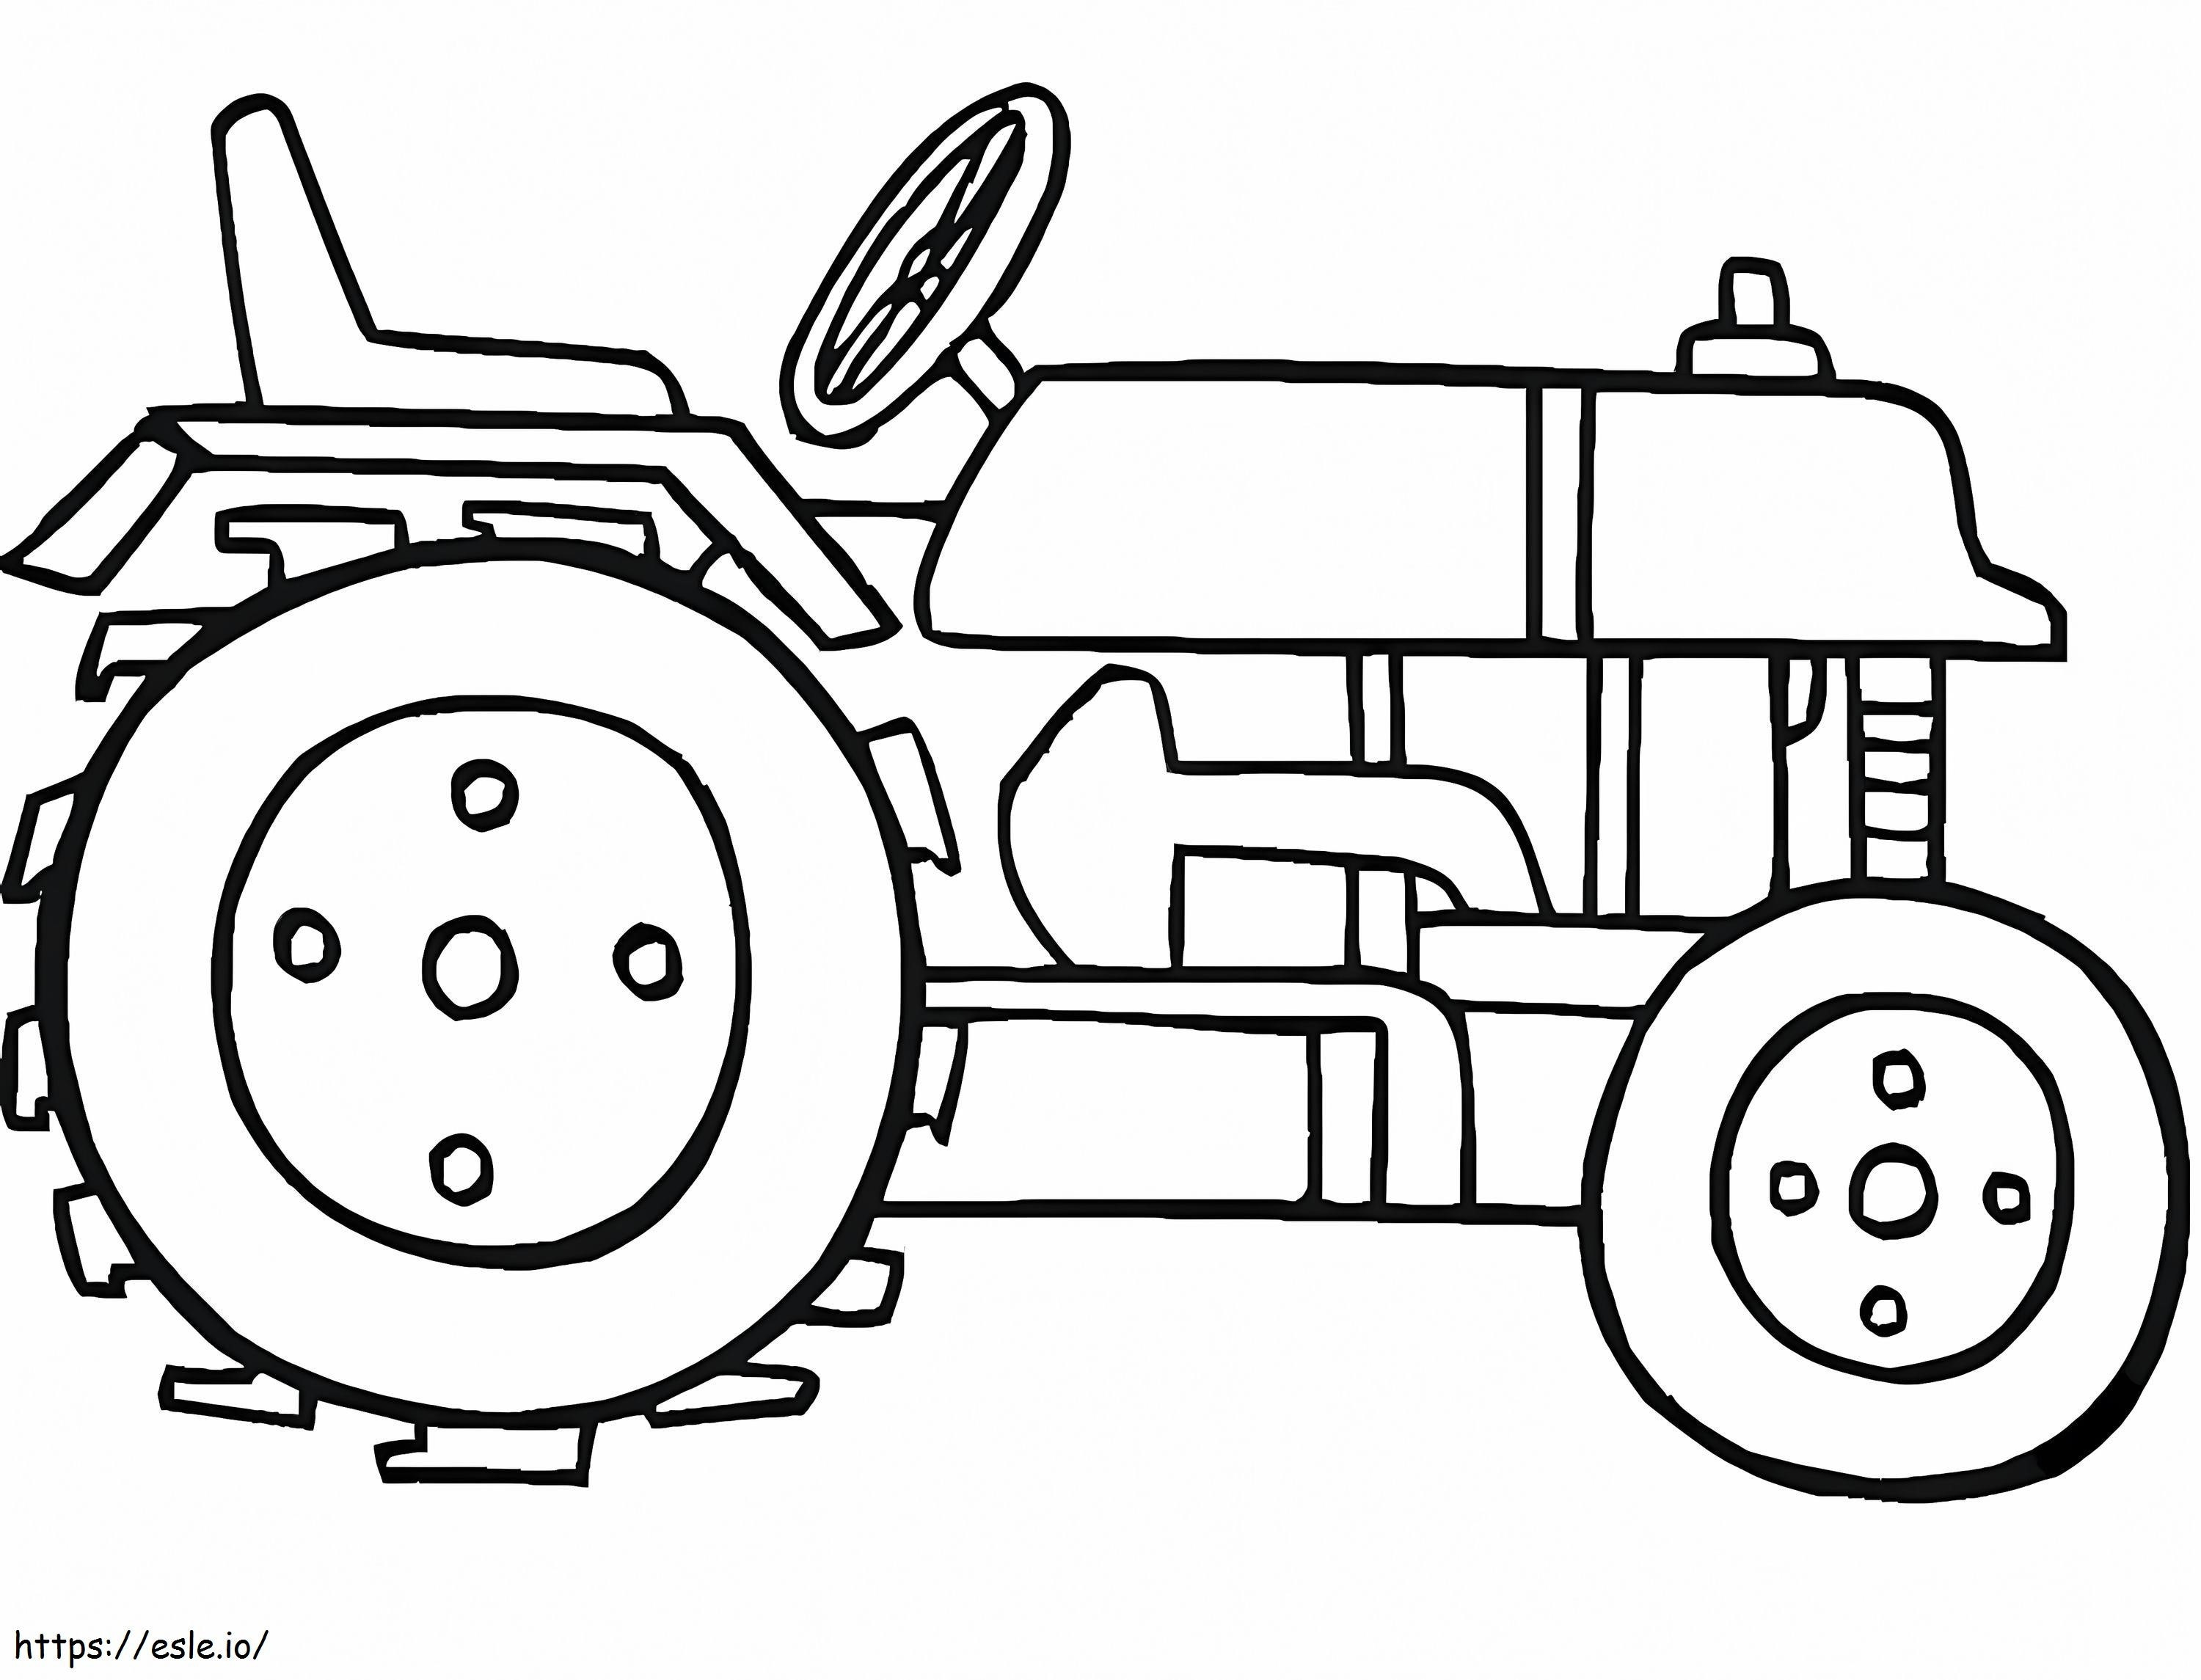 Normal Tractor 2 coloring page